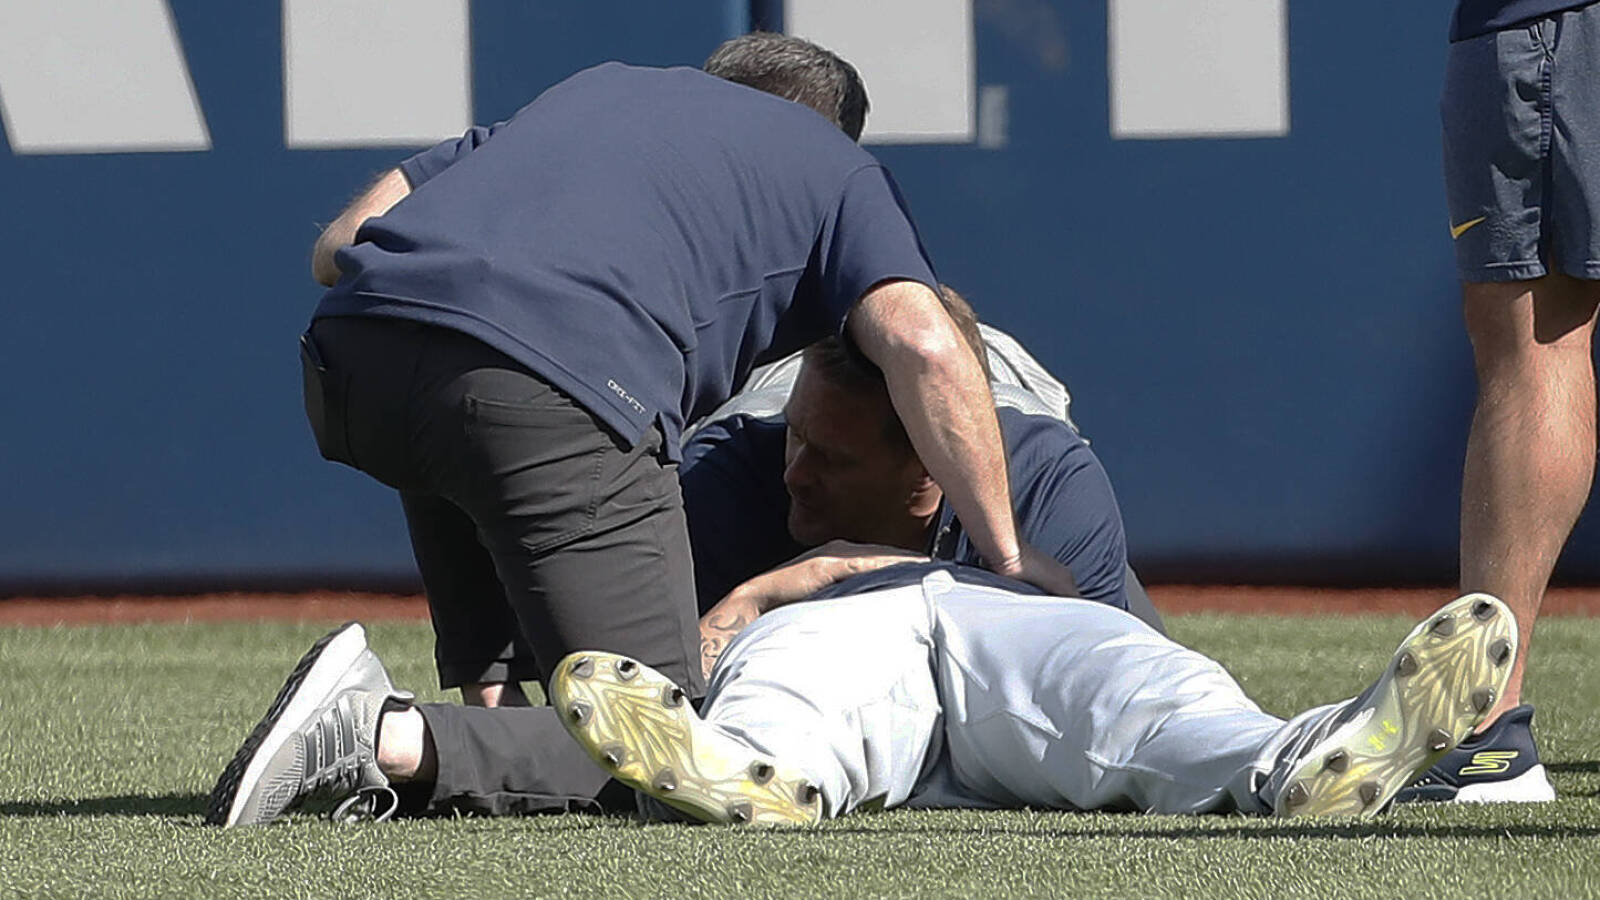 Brewers Pitcher Jakob Junis Alert and Responsive After Being Hit in Neck During Batting Practice